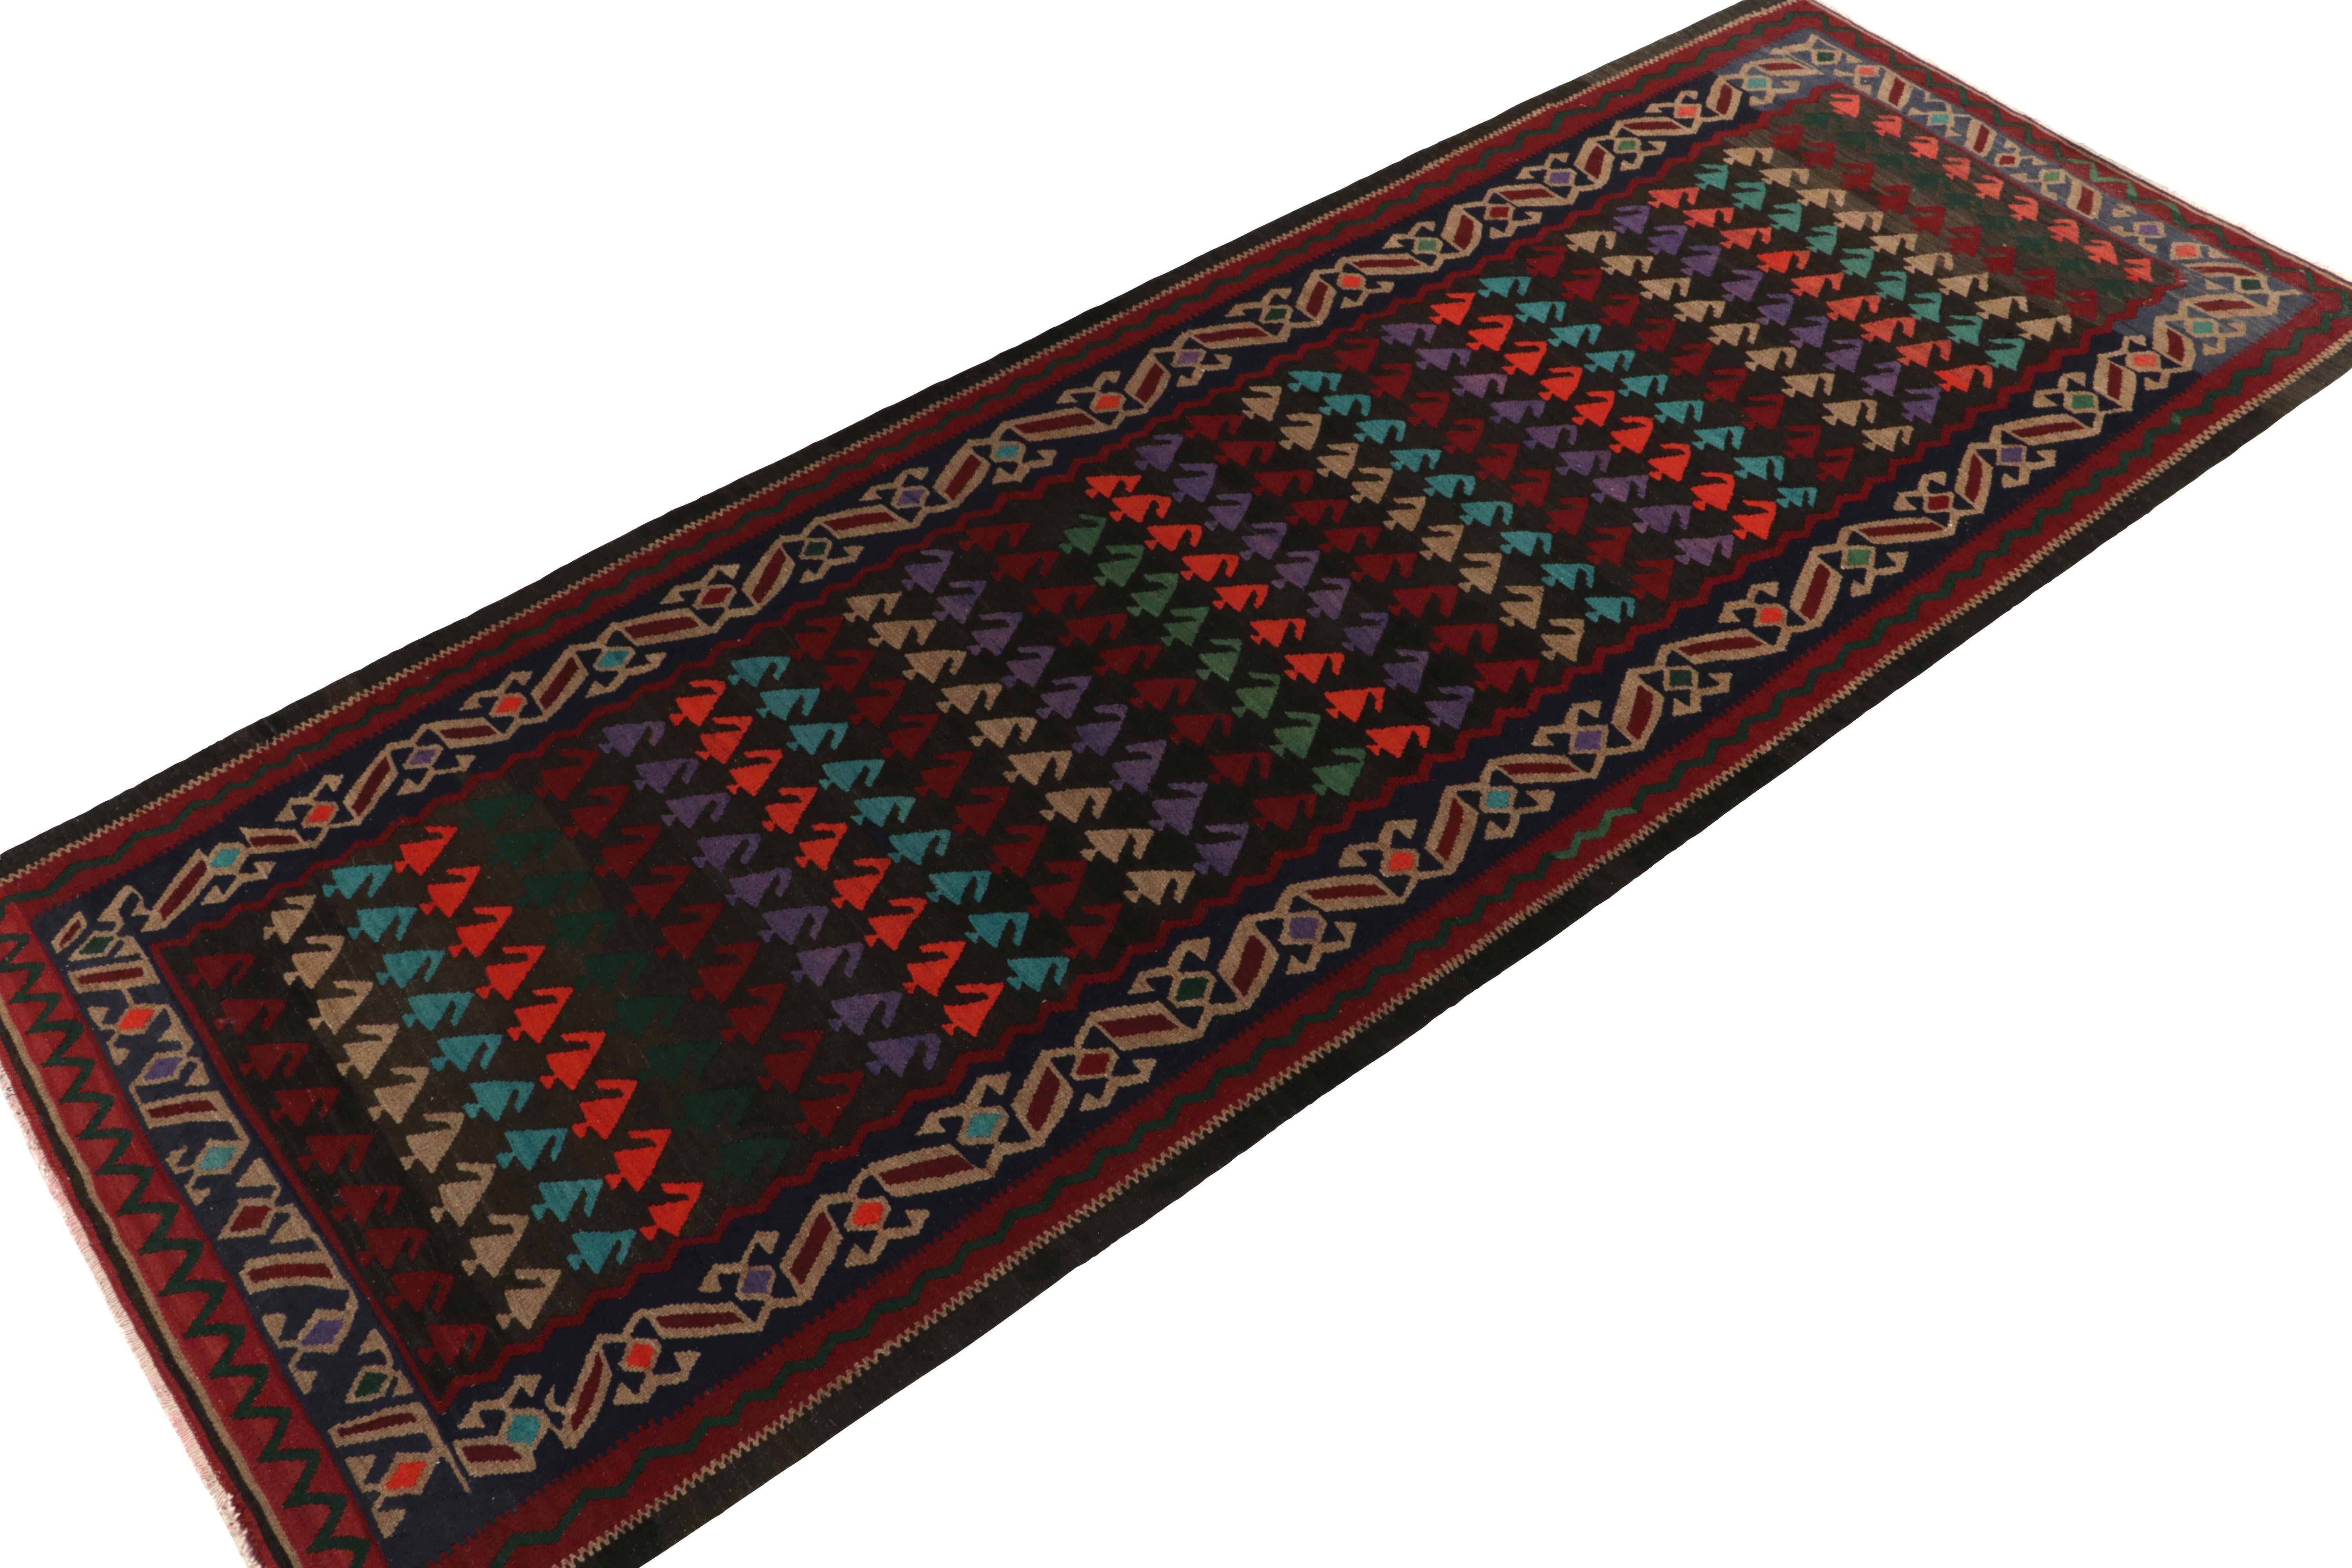 Handwoven in fine wool, a 5x13 vintage kilim runner from Turkey, now joining our Kilim & Flatweave collection. A unique piece of folk art from the mid-century, the gracious scale reflects an intriguingly colorful field pattern in red, near-black,